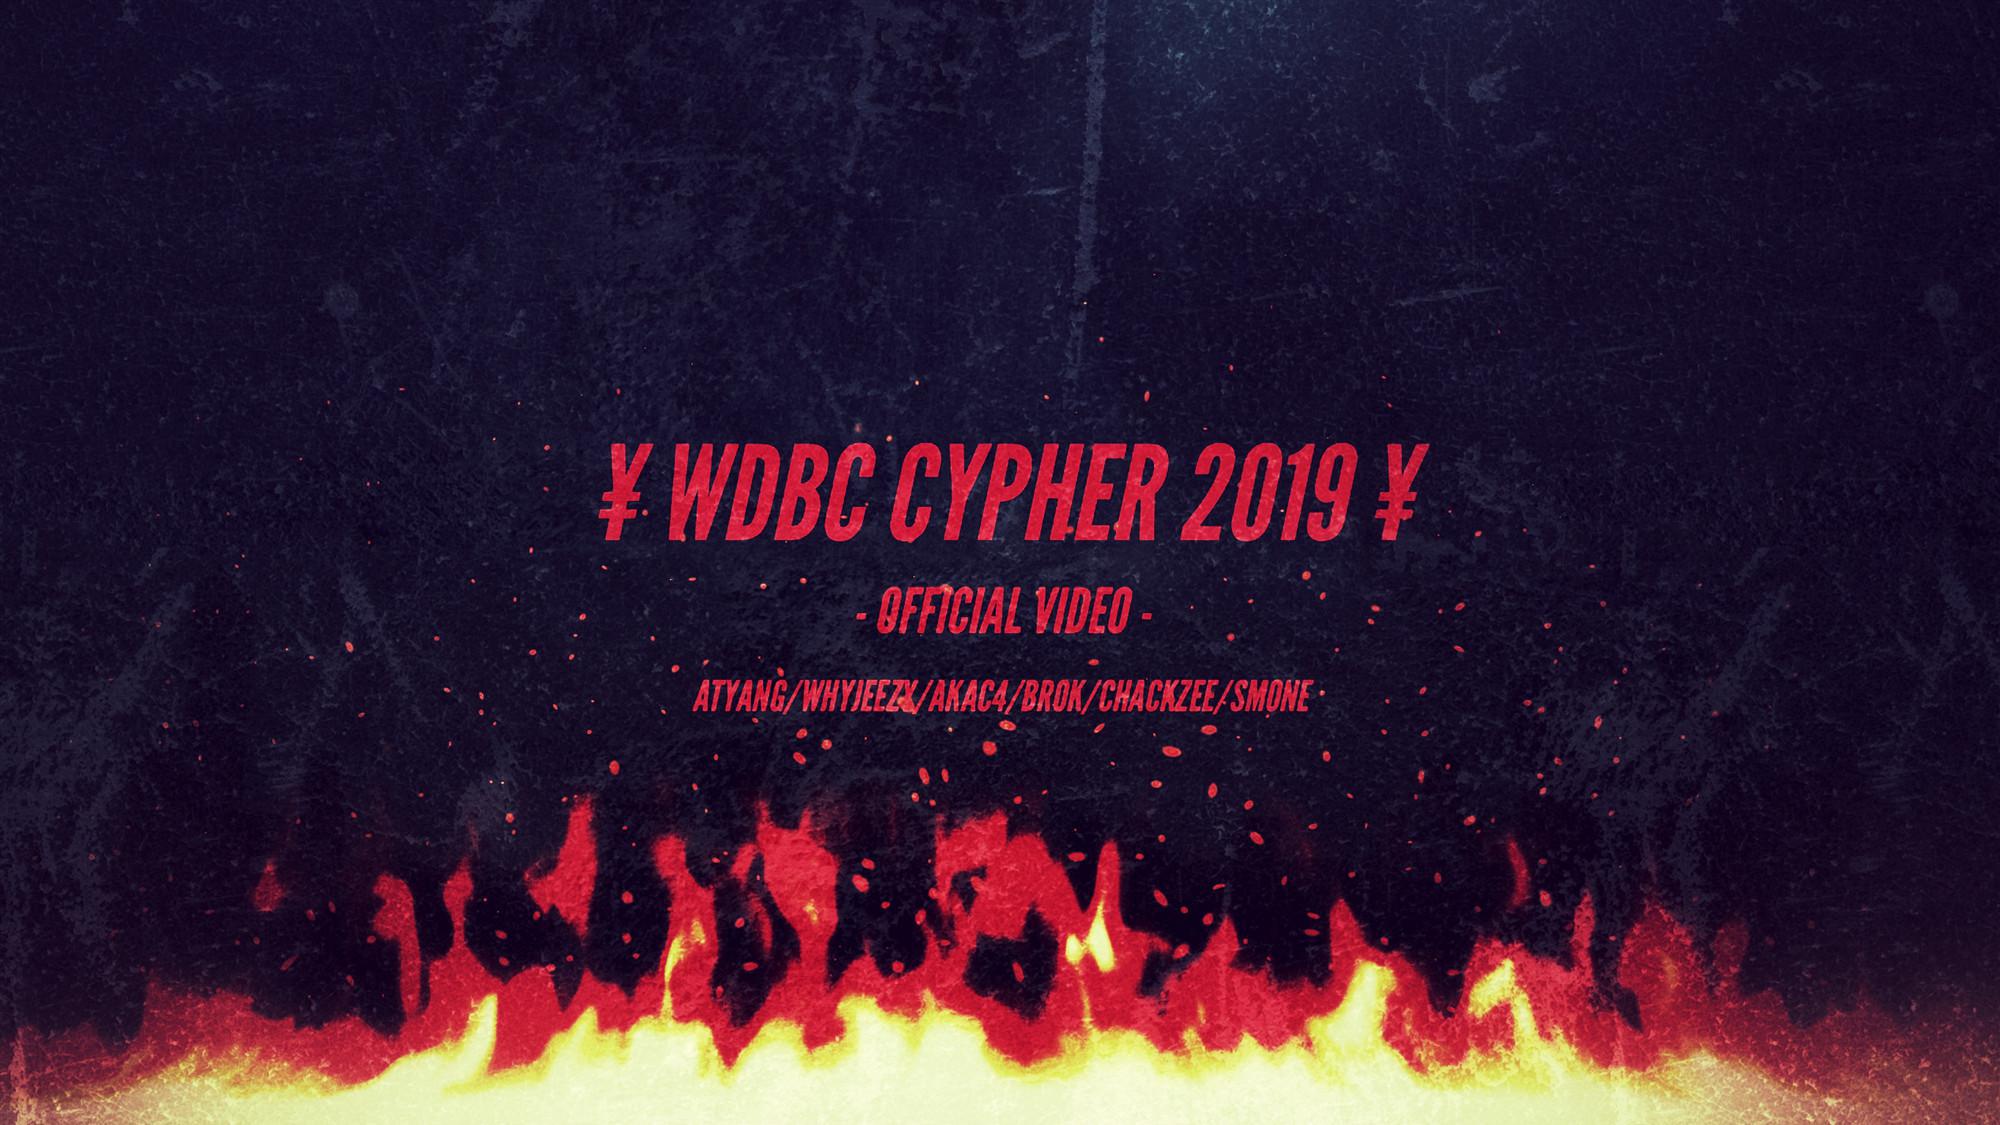 ATYANG - WDBC CYPHER 2019 OFFICIAL M/V